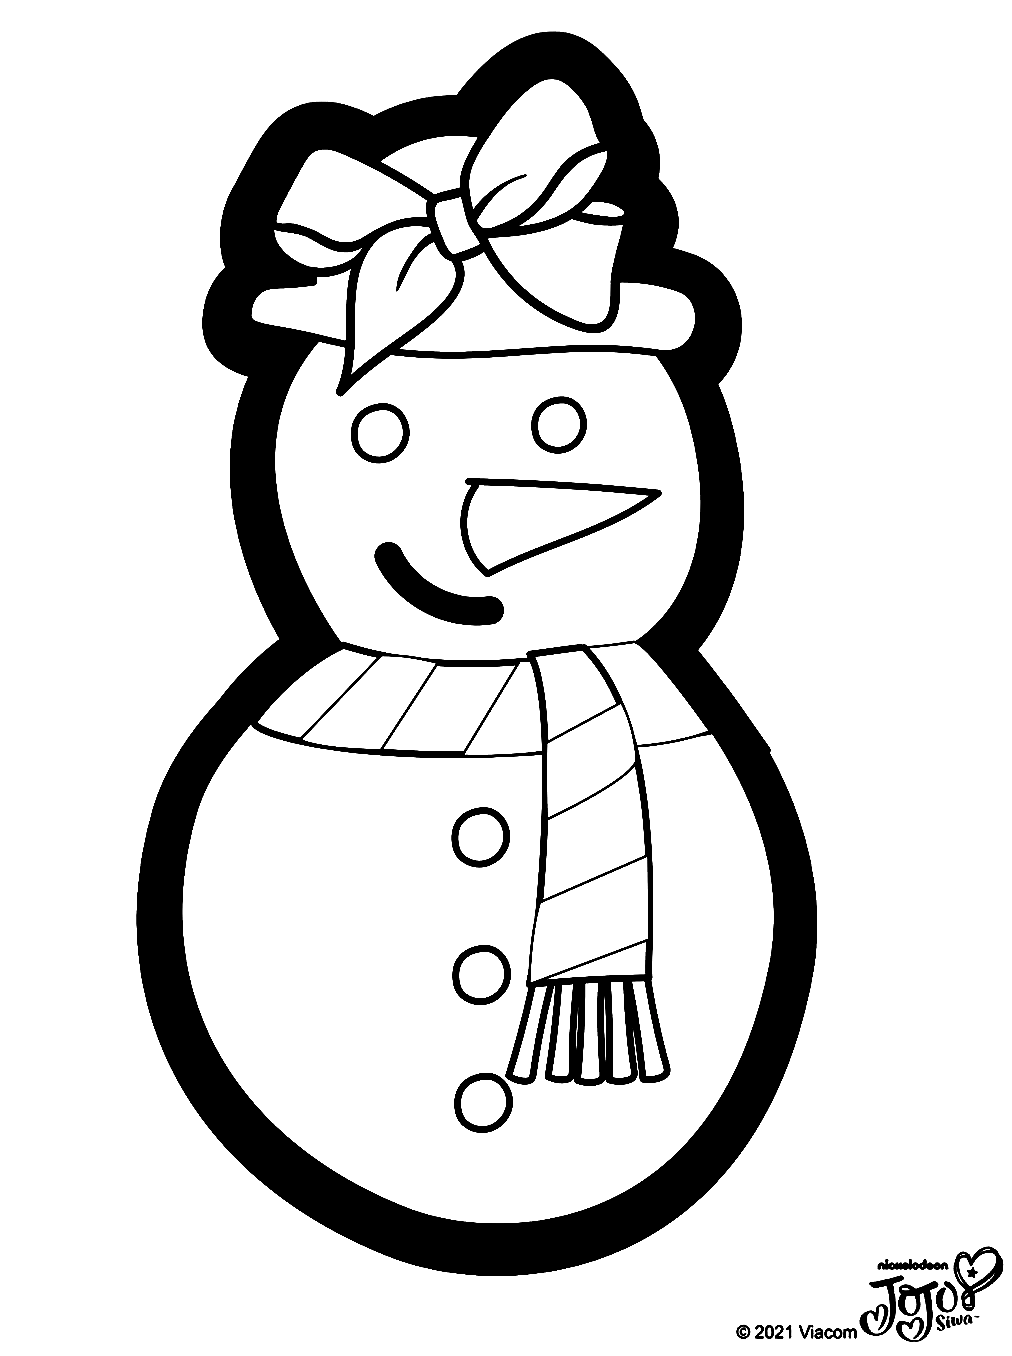 Snowman with Hair Bow of Jojo Siwa Coloring Page